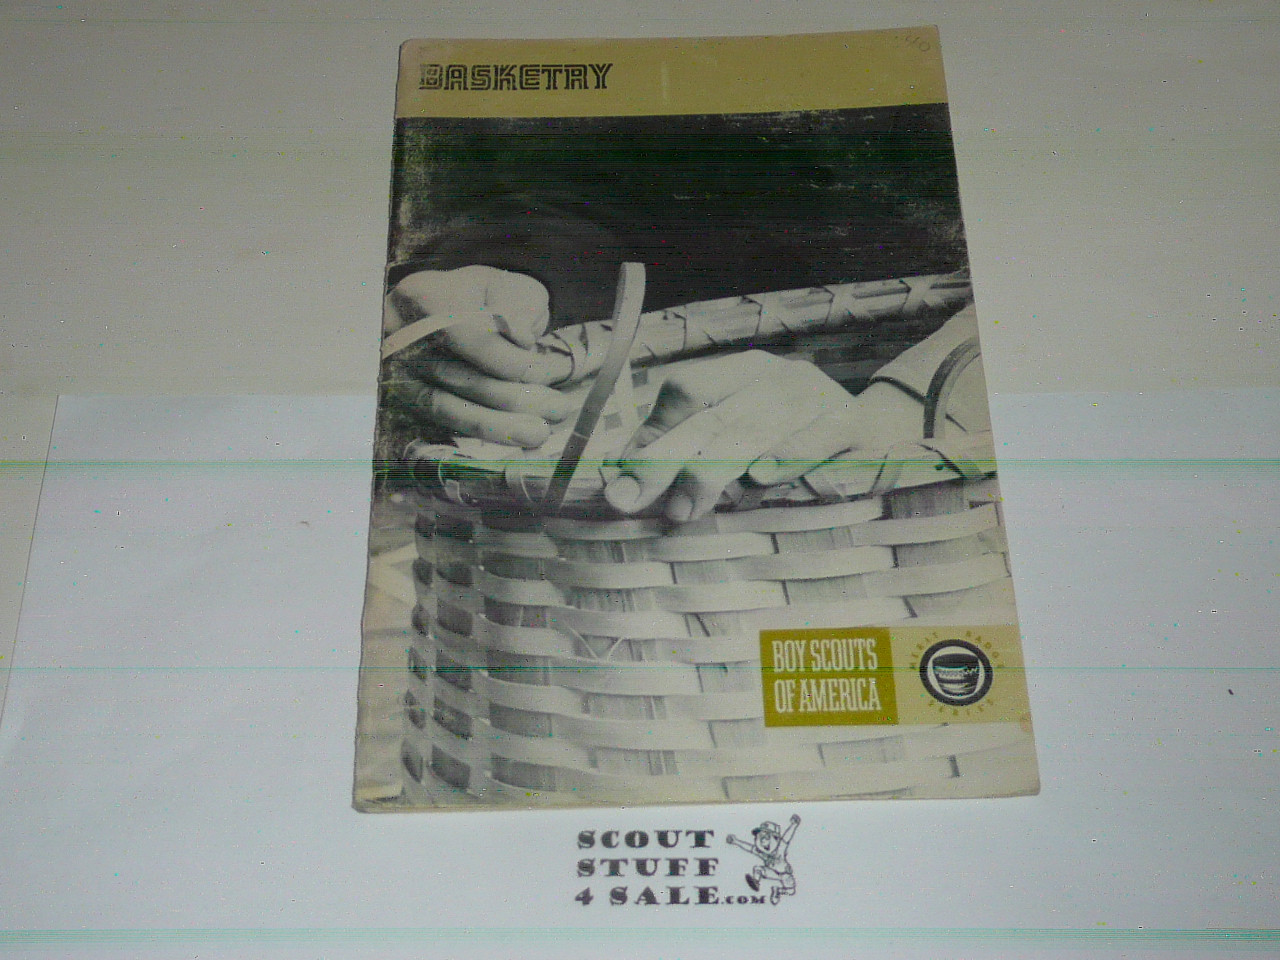 Basketry Merit Badge Pamphlet, Type 8, Green Band Cover, 2-77 Printing